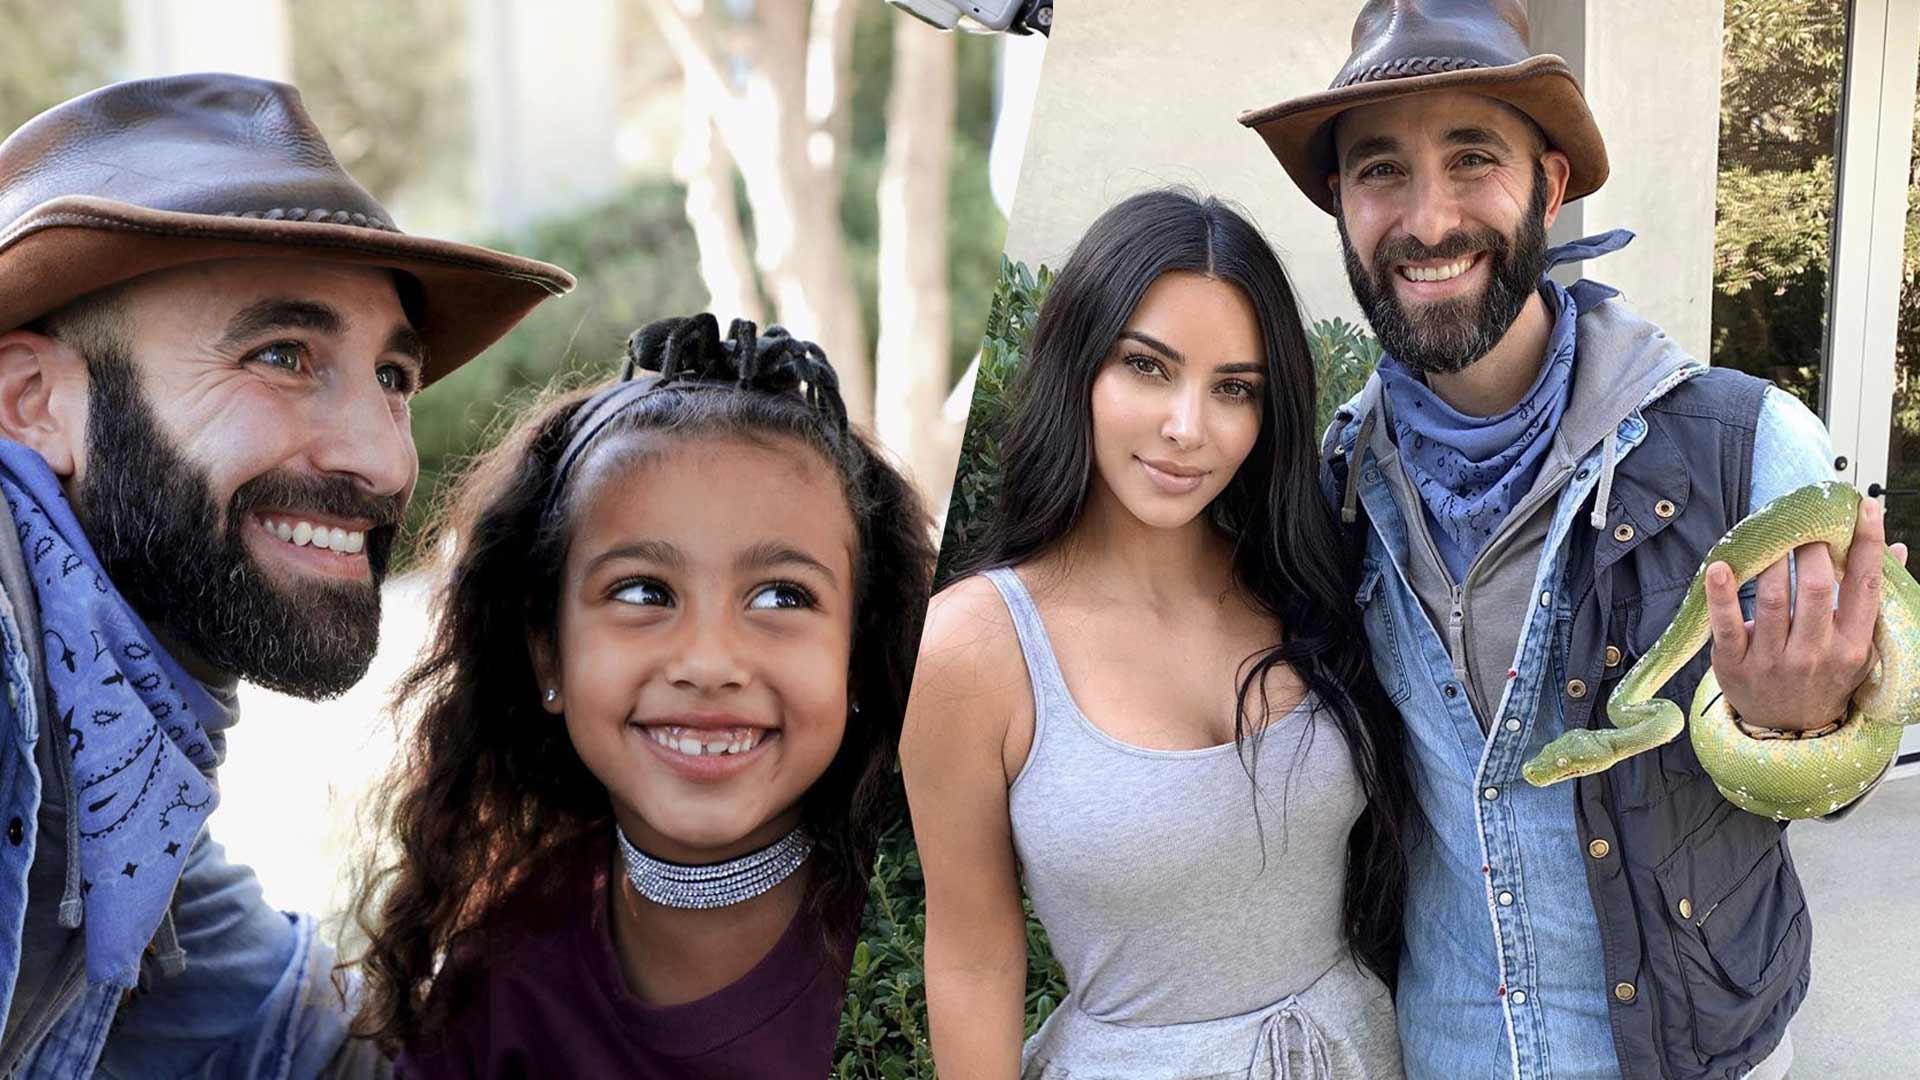 Kim Kardashian’s Daughter North Poses With Giant Spider On Her Head